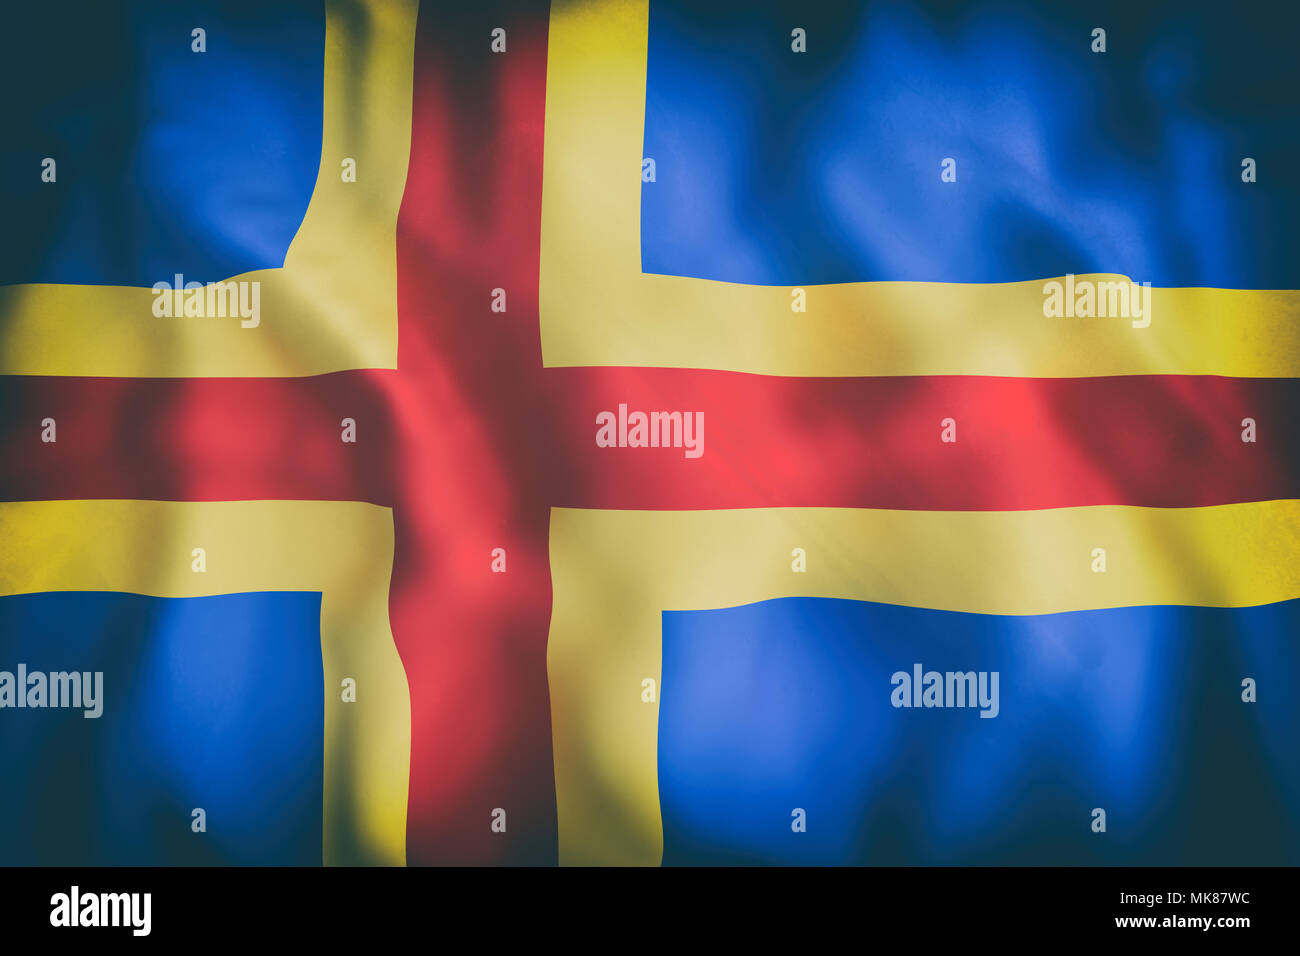 3d Rendering Of An Old Aland Islands Flag Waving Stock Photo Alamy